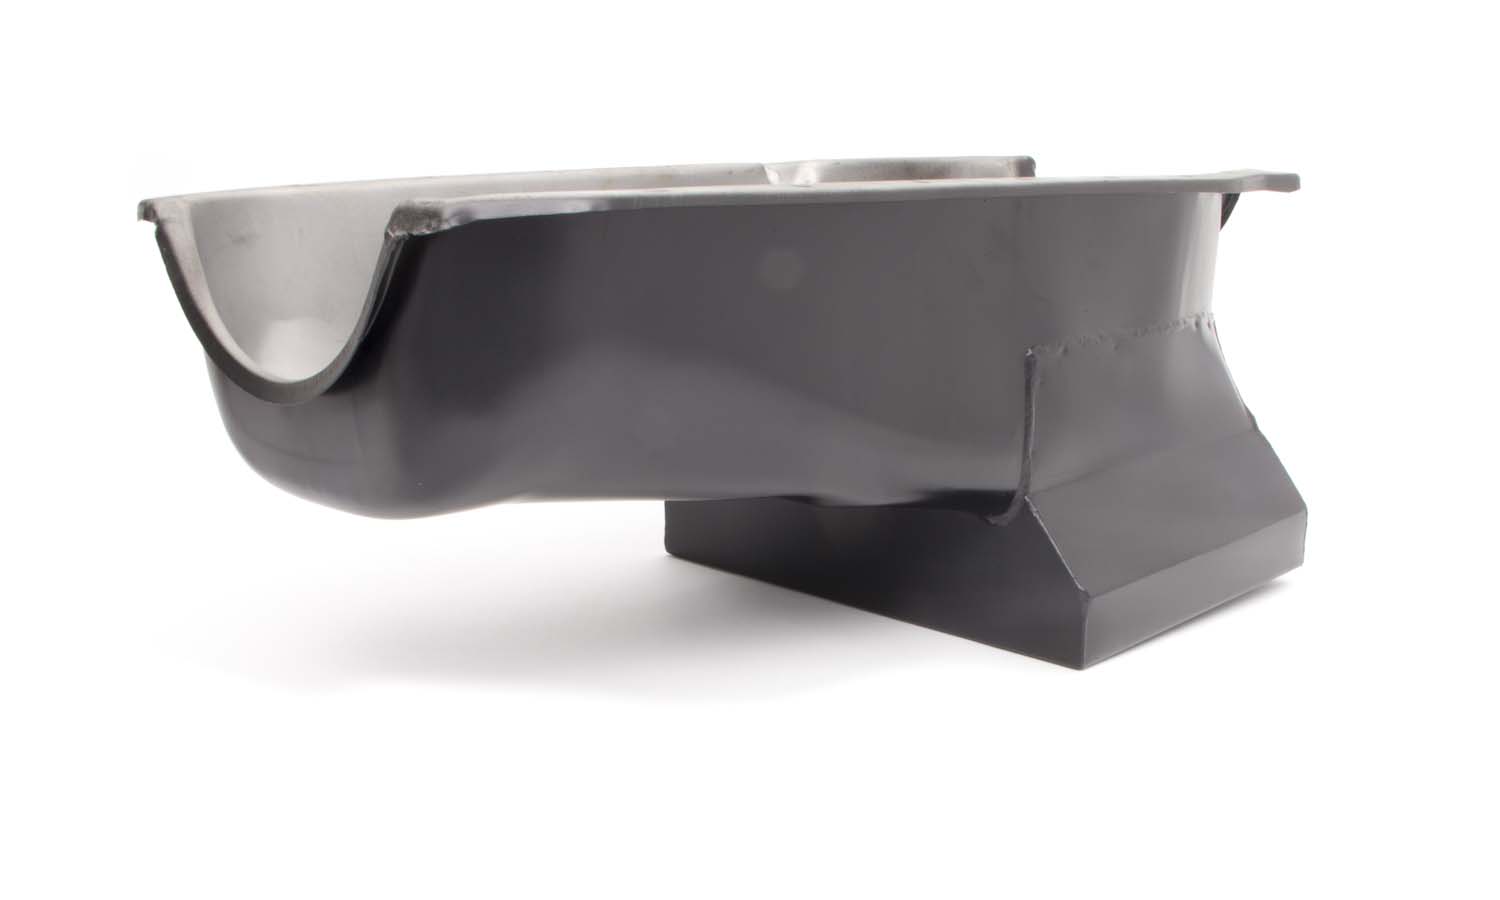 Racing Power Company R9716 Black Drag Race Oil Pan for Small Block Chevy